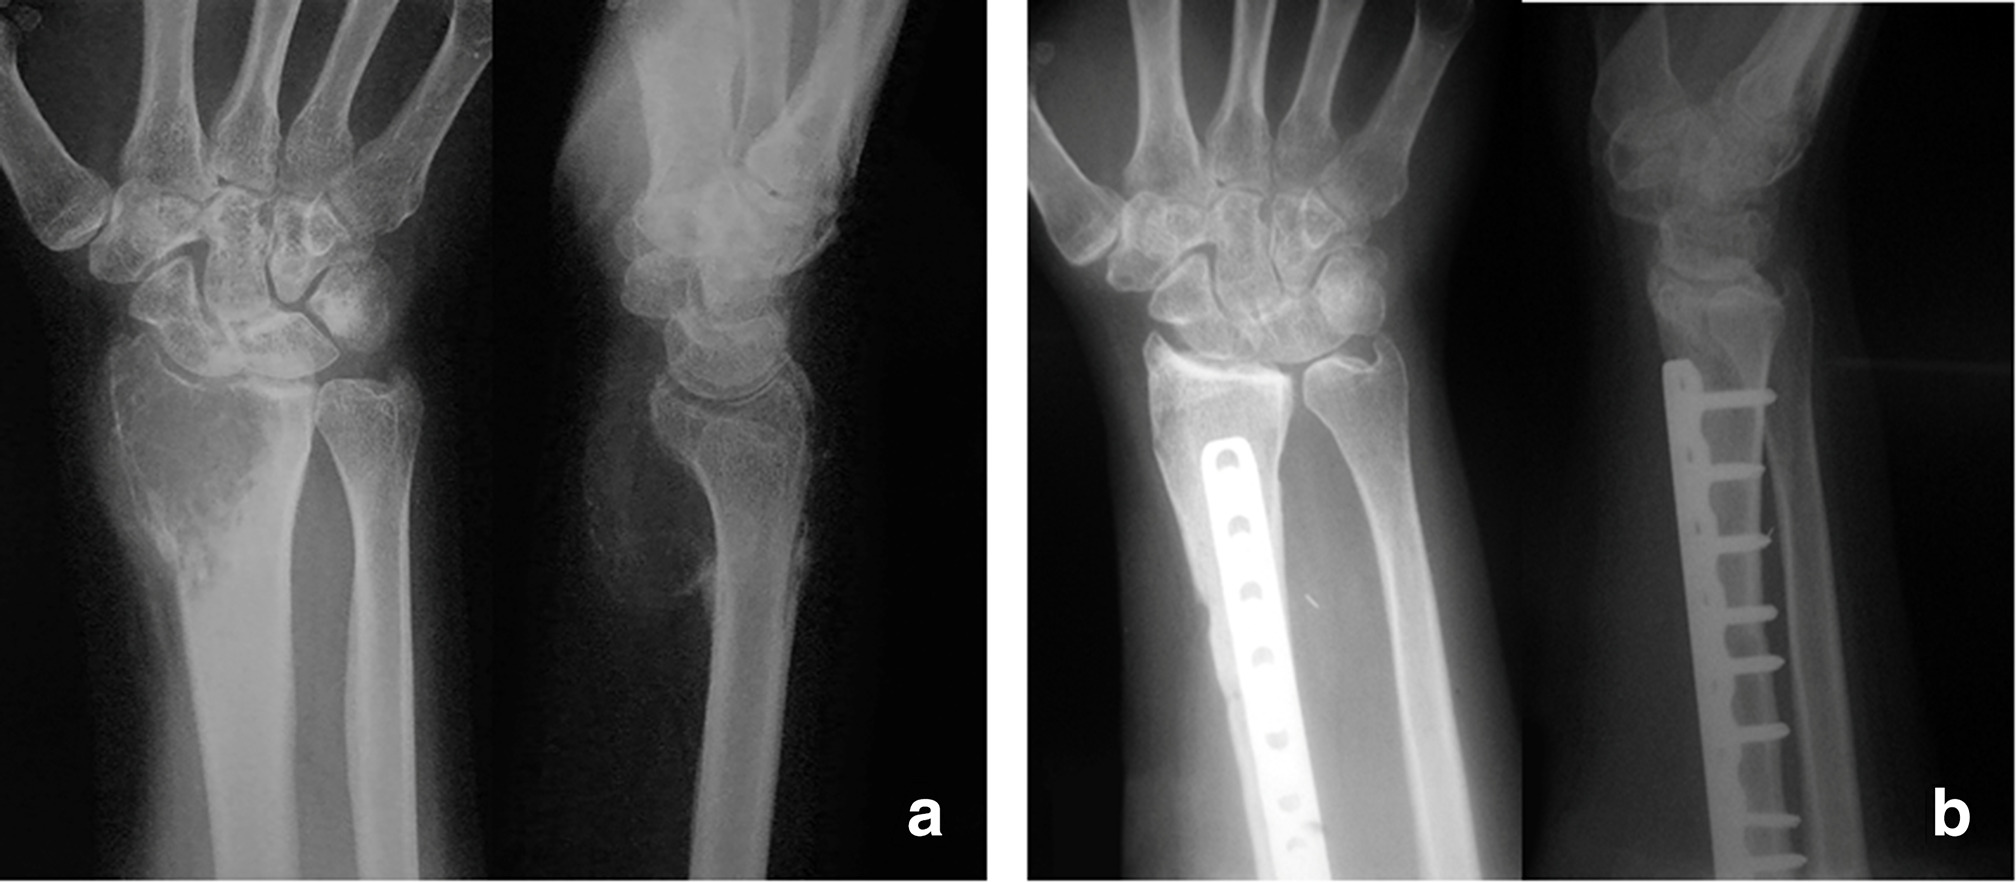 Fig. 4 
          a) 36-year-old patient with high-risk giant cell tumour of the distal radius with cortical thinning and very large soft-tissue component. b) En bloc resection was performed with wrist arthrodesis with a free vascularized fibula autograft and plate fixation. This patient developed pulmonary metastases, treated with continuous denosumab. Otherwise, there were no recurrences nor complications during ten-year follow-up.
        